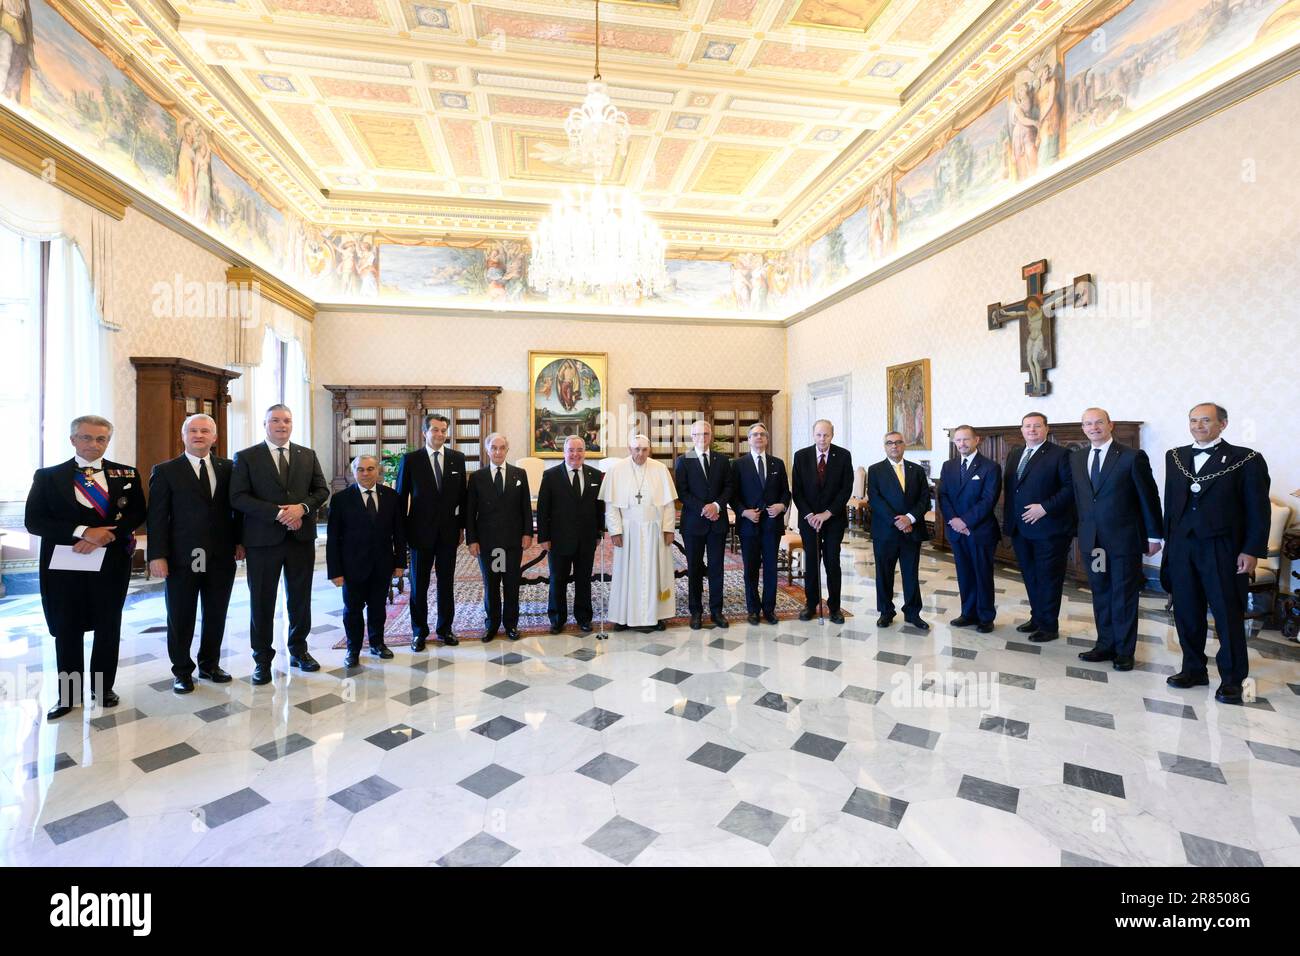 Vatican, Vatican. 29th May, 2023. Italy, Rome, Vatican, 19-06-2023 His Most Eminent Highness Fra' John T. Dunlap, Prince and Grand Master of the Sovereign Military Order of Malta 19-06-2023 Sua Altezza Eminentissima Fra' John T. Dunlap, Principe e Gran Maestro del Sovrano Militare Ordine di Malta Photograph by Vatican Media /Catholic Press Photo/ipa RESTRICTED TO EDITORIAL USE - NO MARKETING - NO ADVERTISING CAMPAIGNS Credit: Independent Photo Agency/Alamy Live News Stock Photo